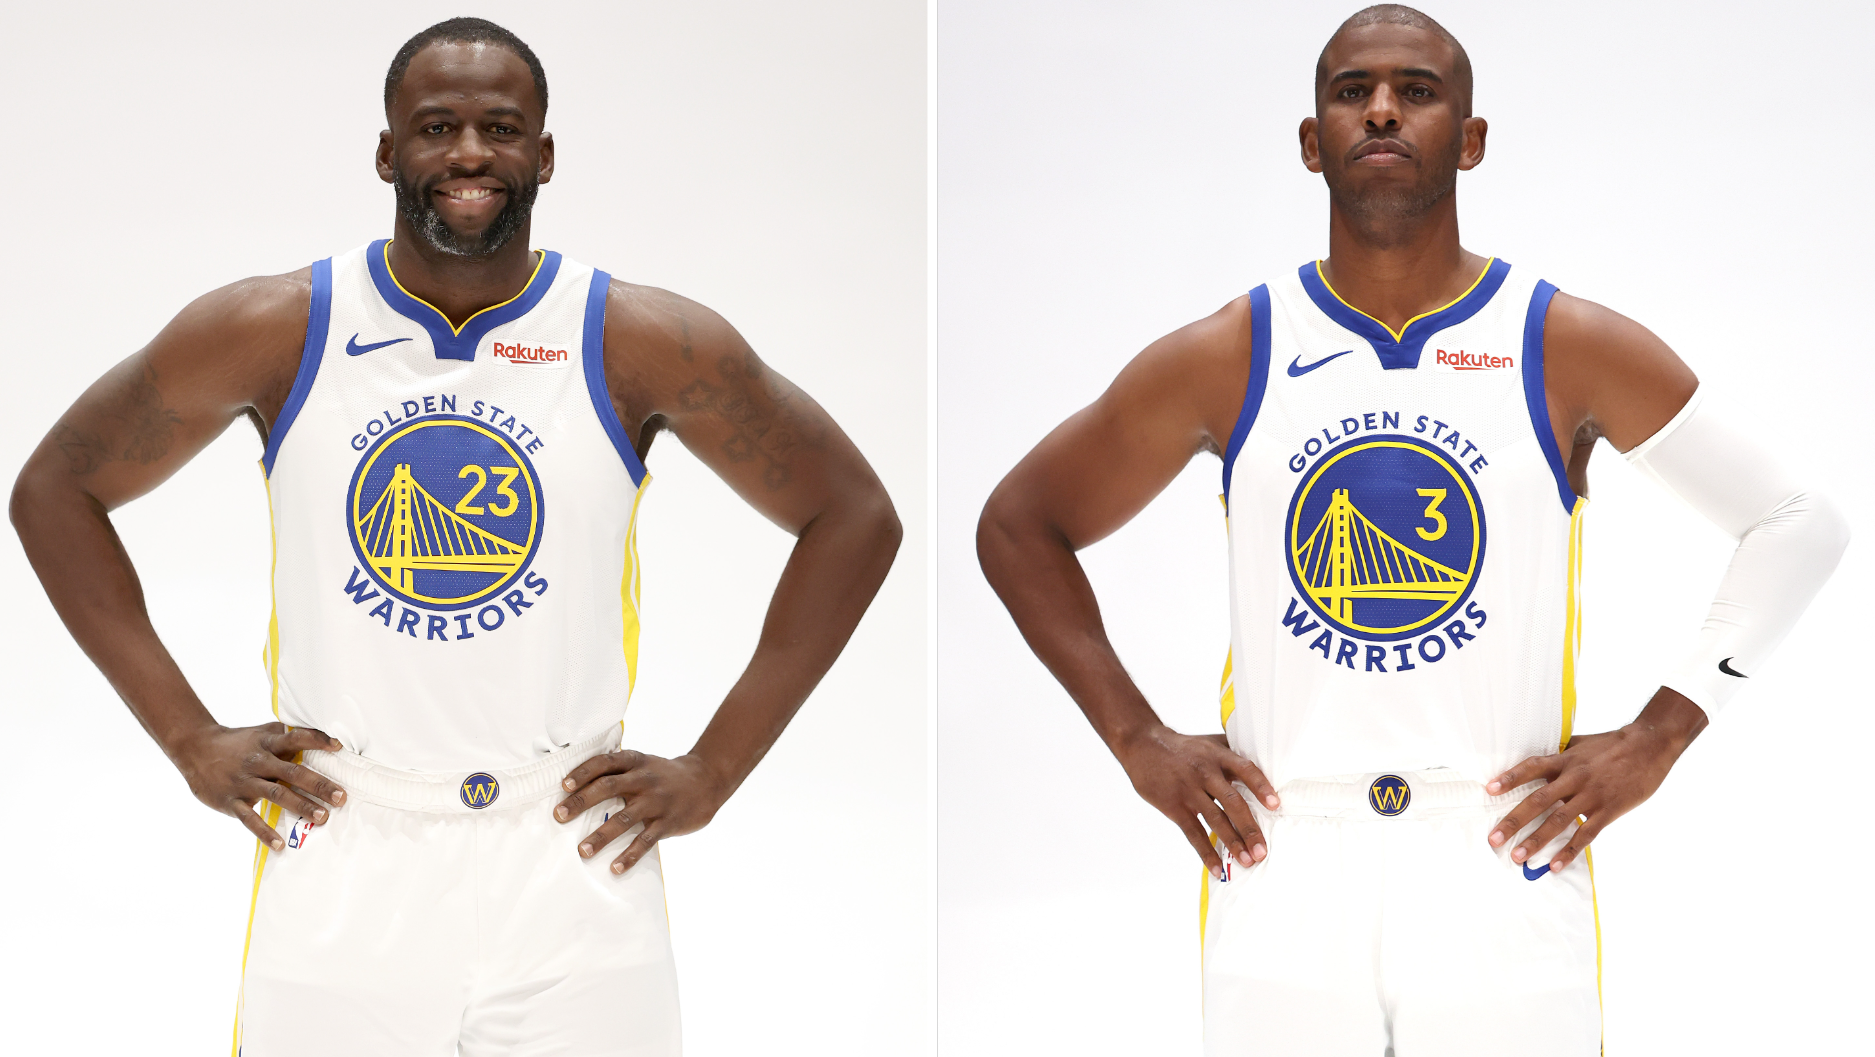 Draymond Green: If you've ever watched Chris Paul compete, he's